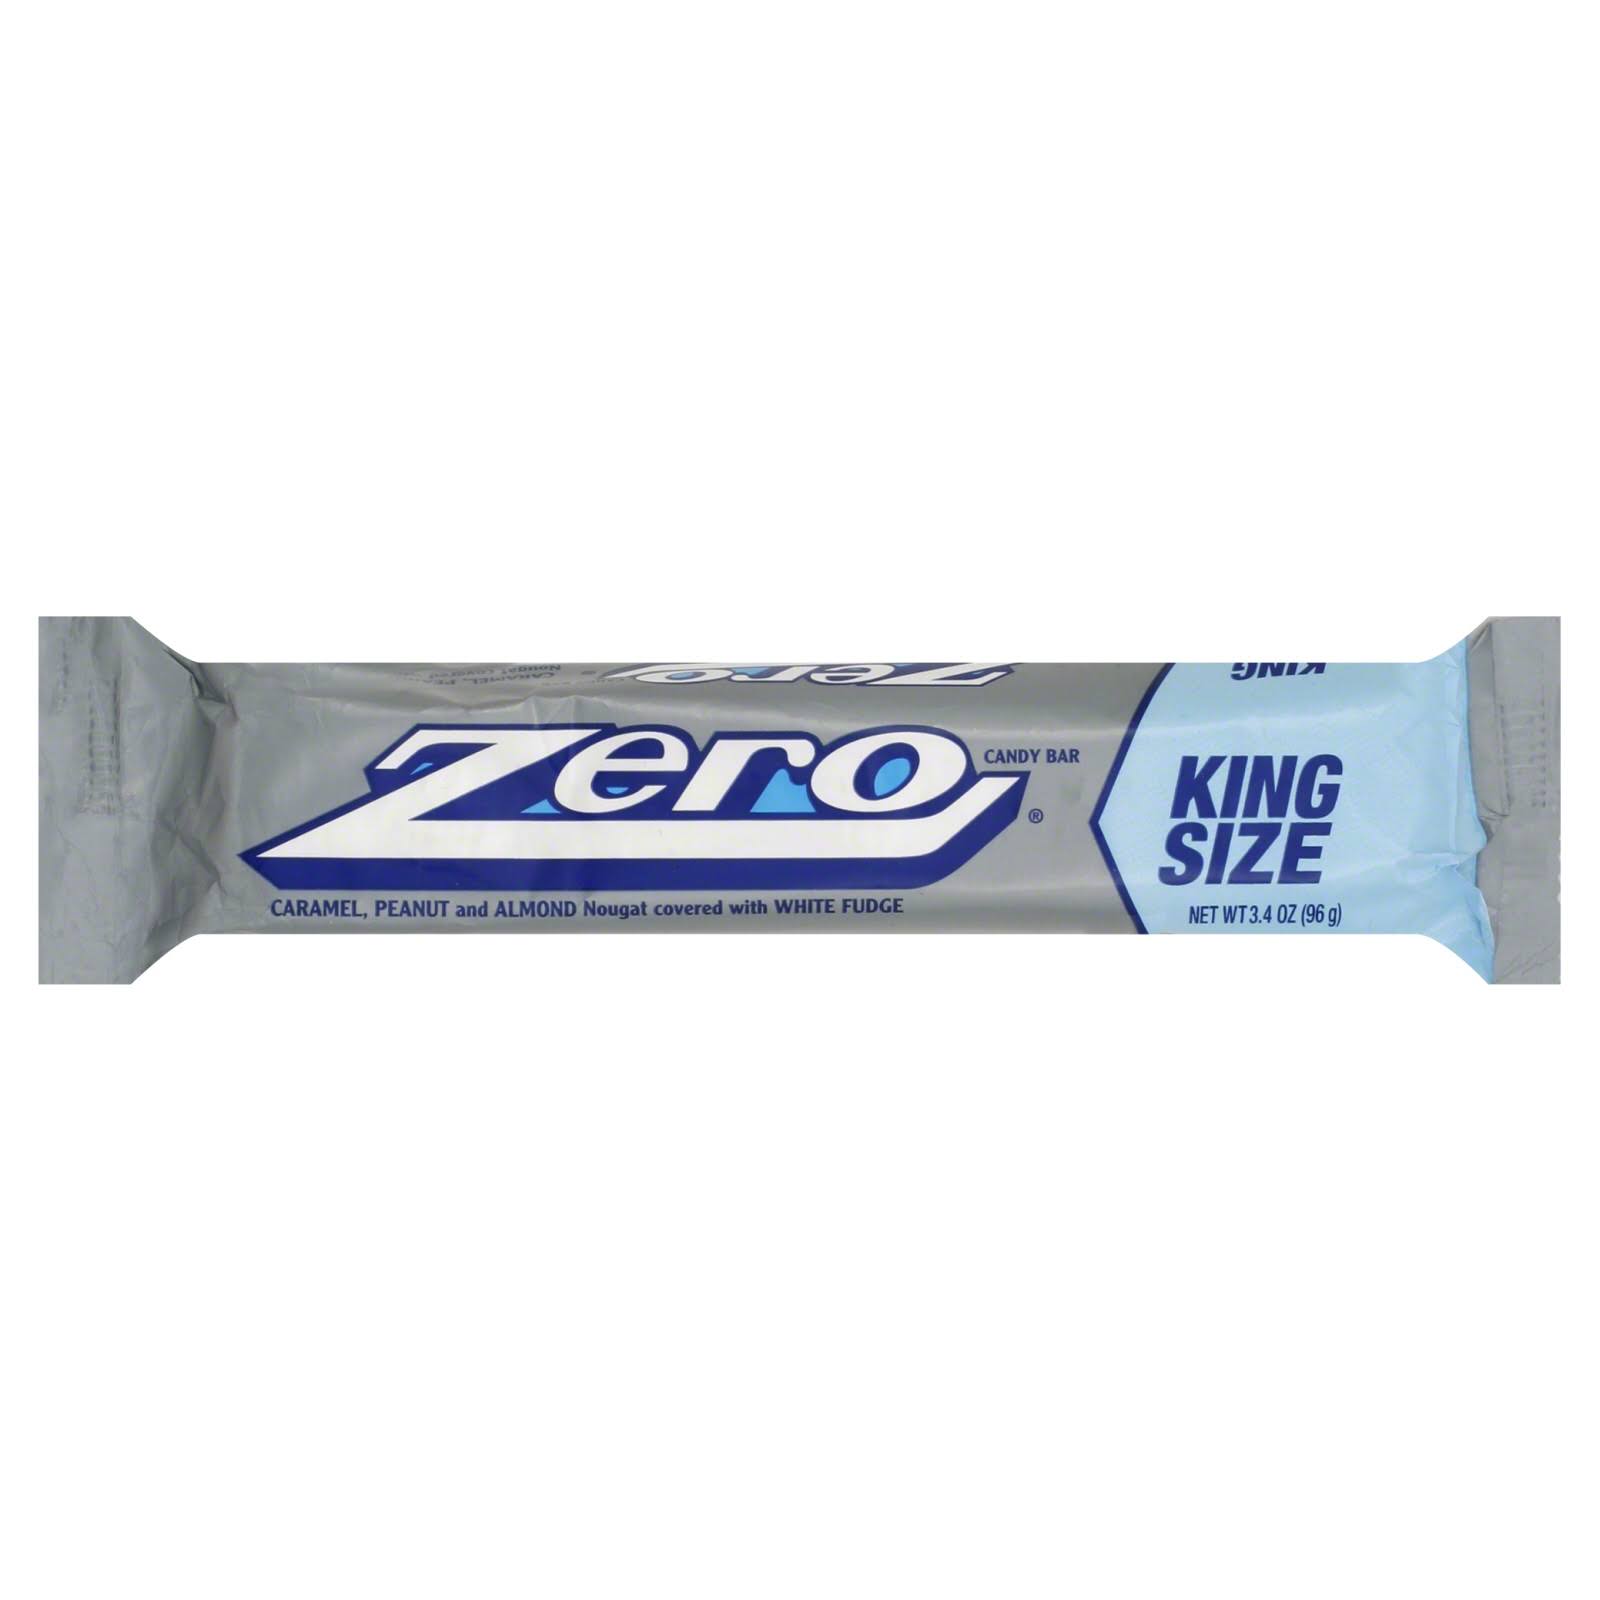 Zero Candy Bar - King Size, 3.4oz, Pack of 12